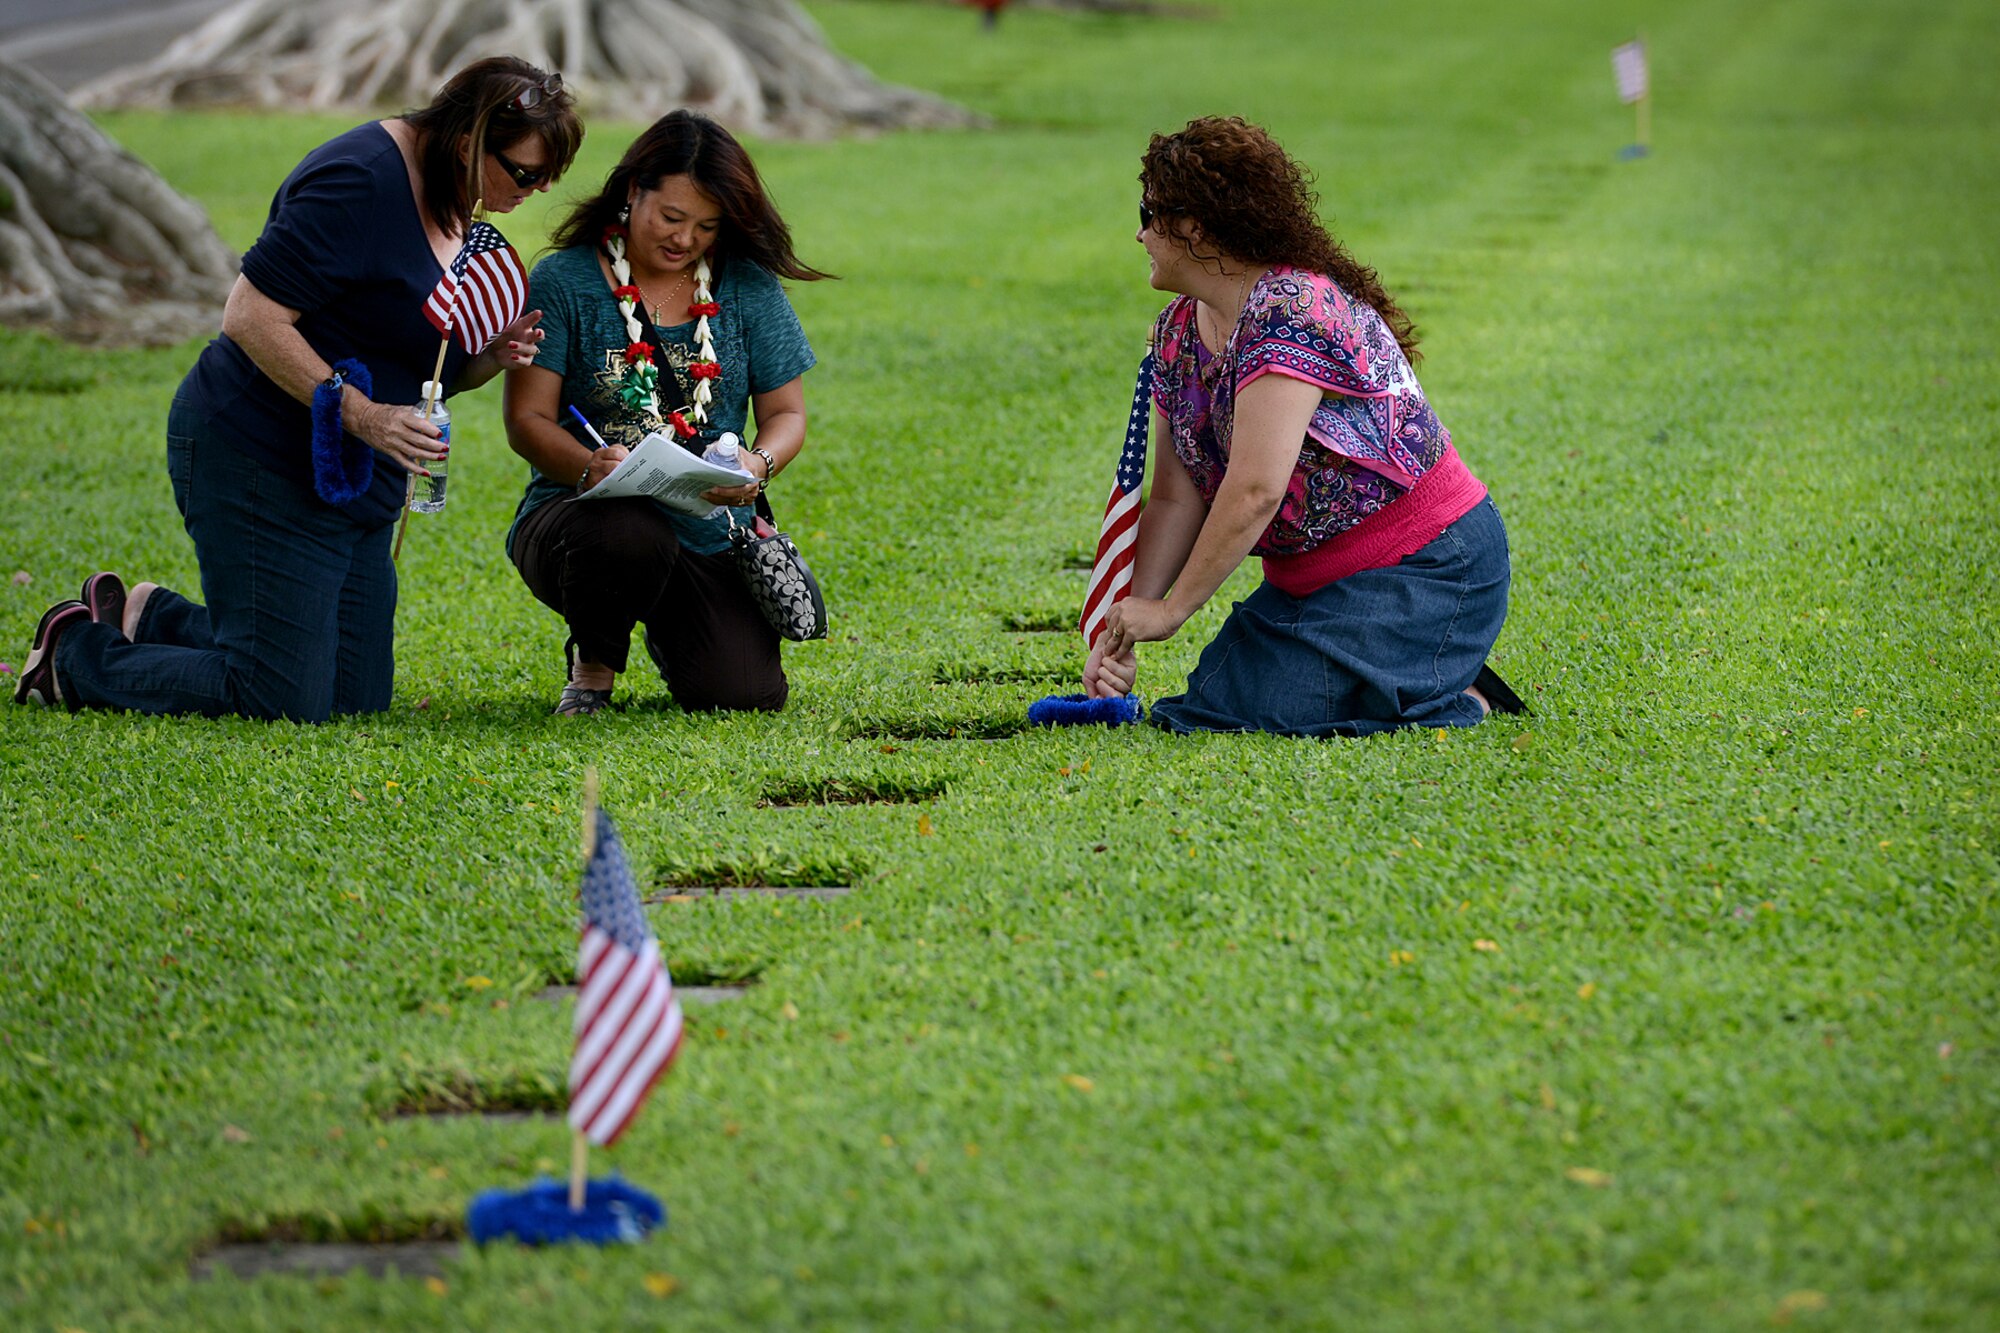 Laura McLeod, Jessie Higa and Stephanie Meares place an American flag and a lei at the headstone of a fallen Army Air Forces Airmen who was killed during the Dec. 7, 1941, attacks on Oahu at the National Cemetery of the Pacific, at Punchbowl in Honolulu, Dec. 2, 2012. Higa, a volunteer historian and president of the Hickam History Club, directed a team of volunteers to honor the men who were killed on that infamous day. Higa has studied WWII history, with an emphasis on Hickam Field for more than 8 years. (U.S. Air Force photo/Staff Sgt. Mike Meares)